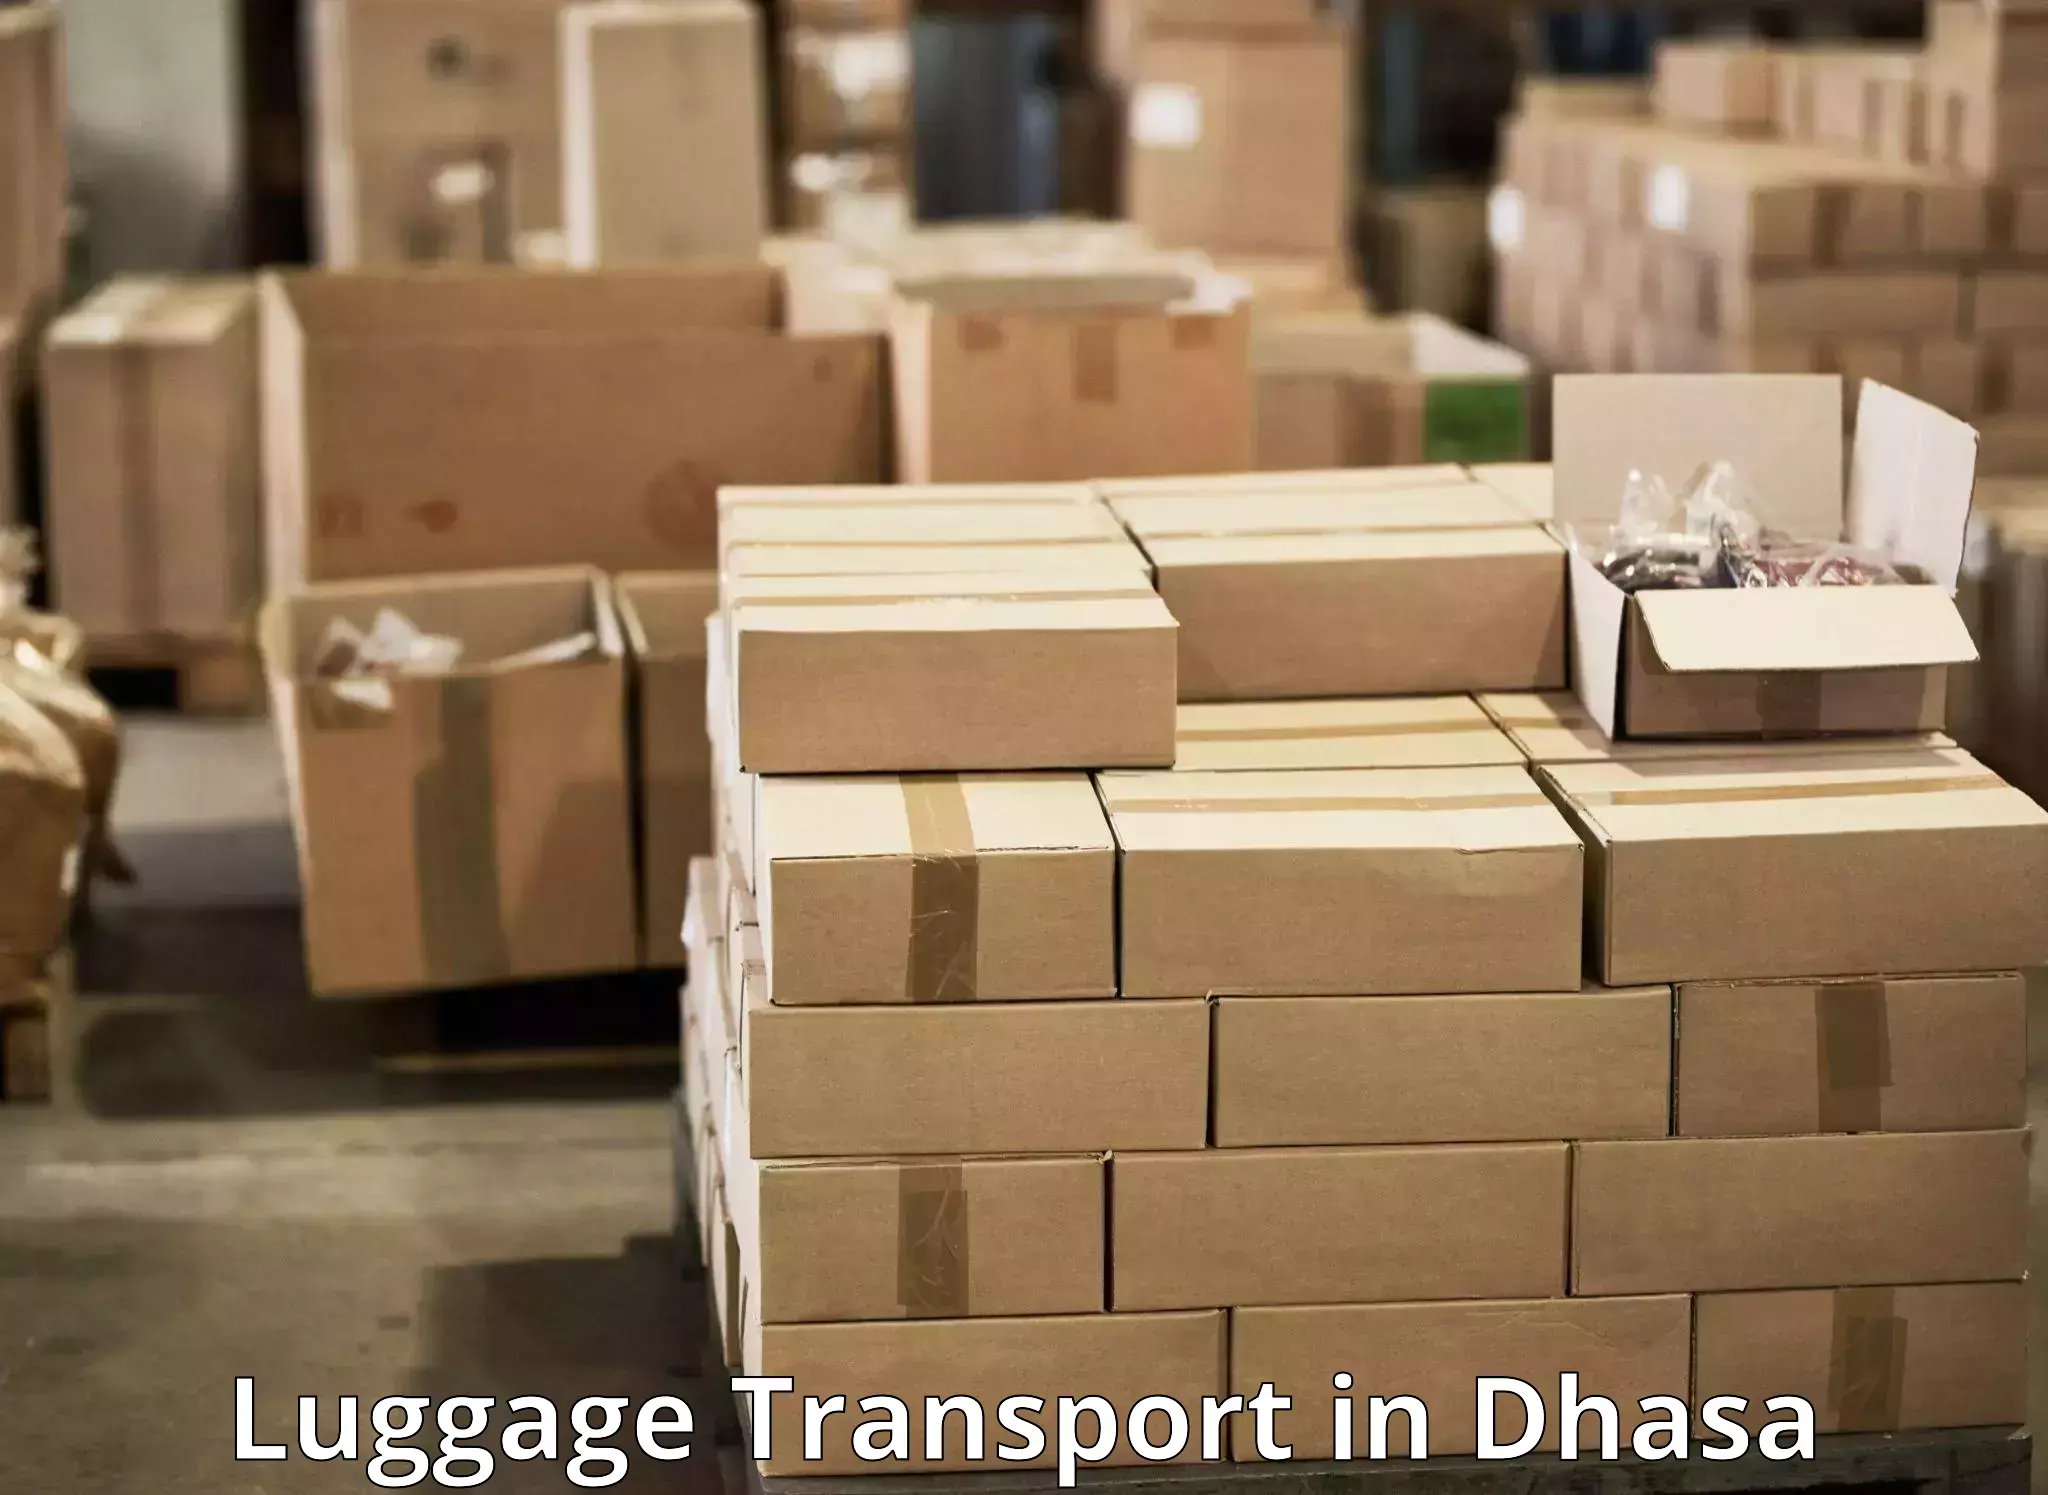 Luggage forwarding service in Dhasa